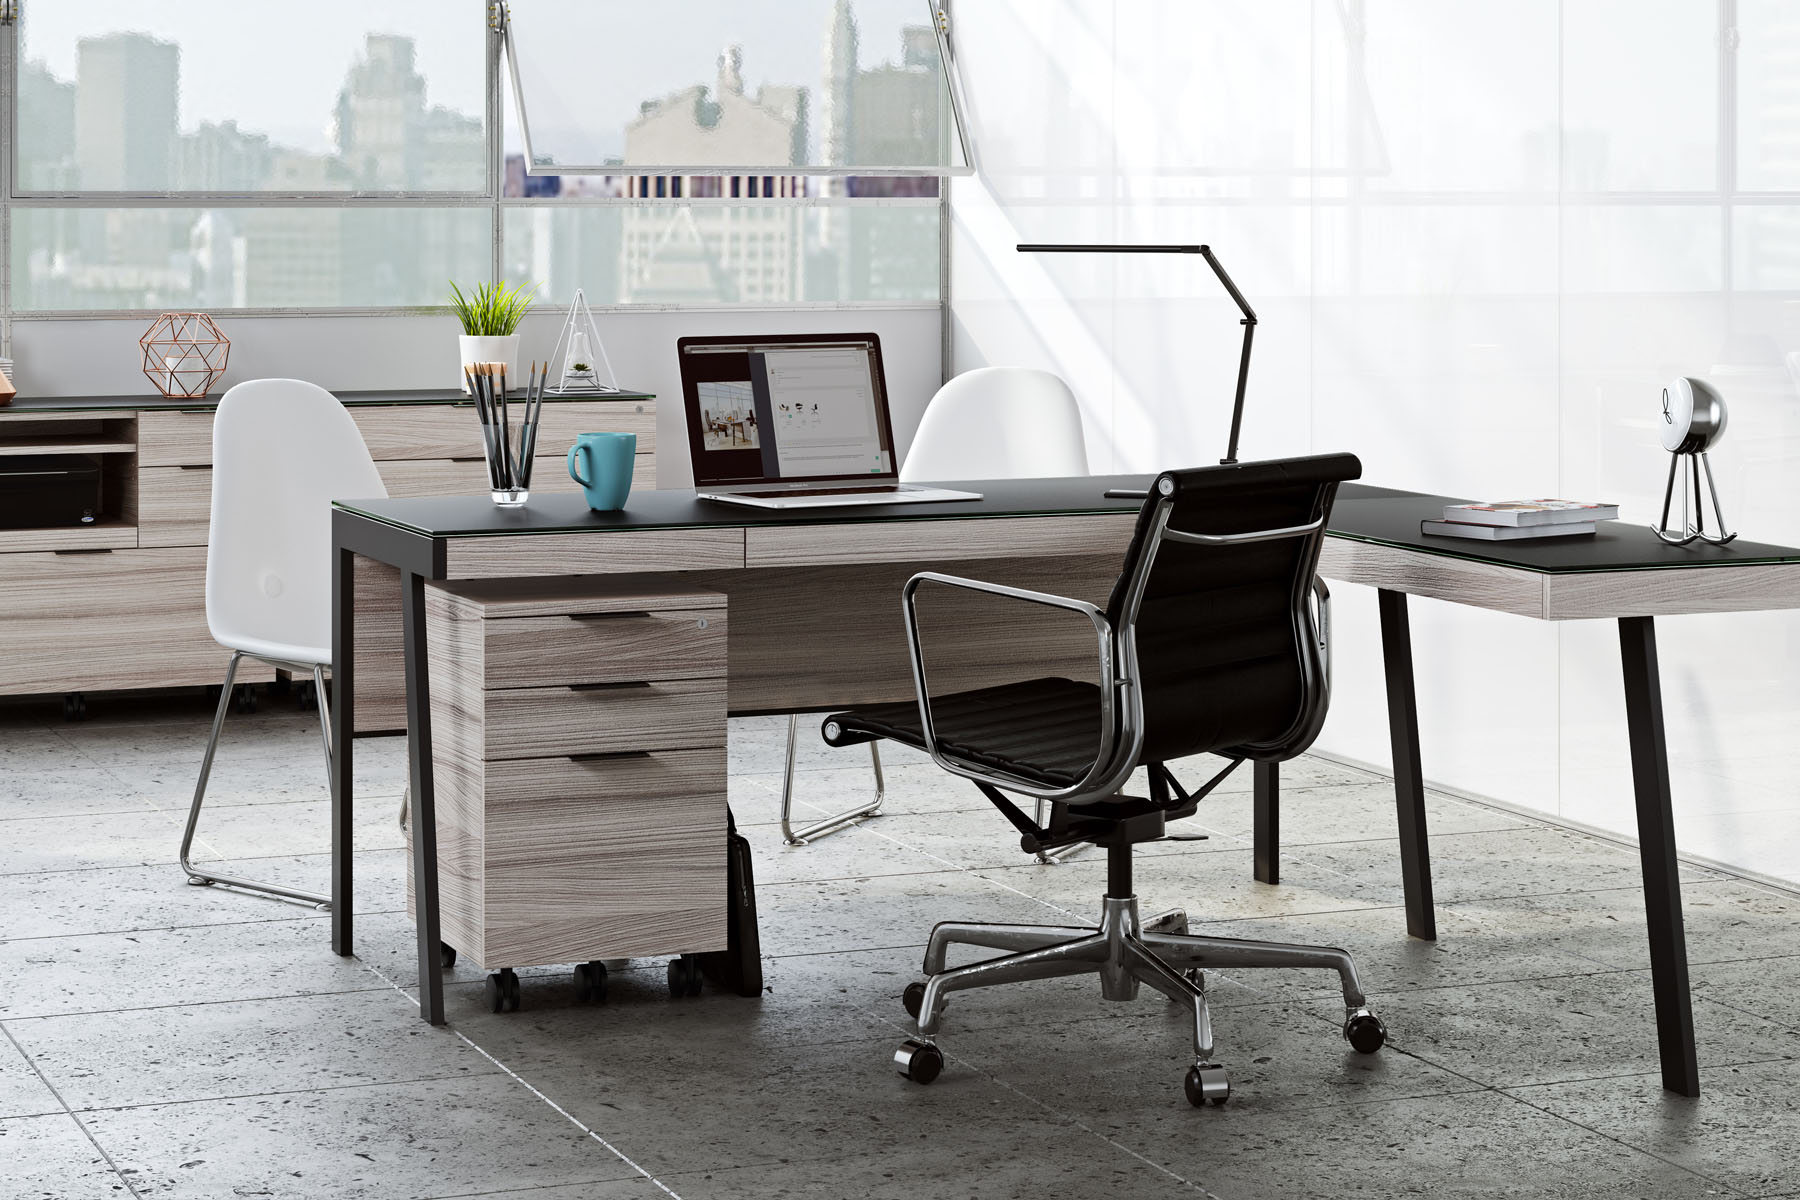 Light Colored Office With Modern Desk & Chairs